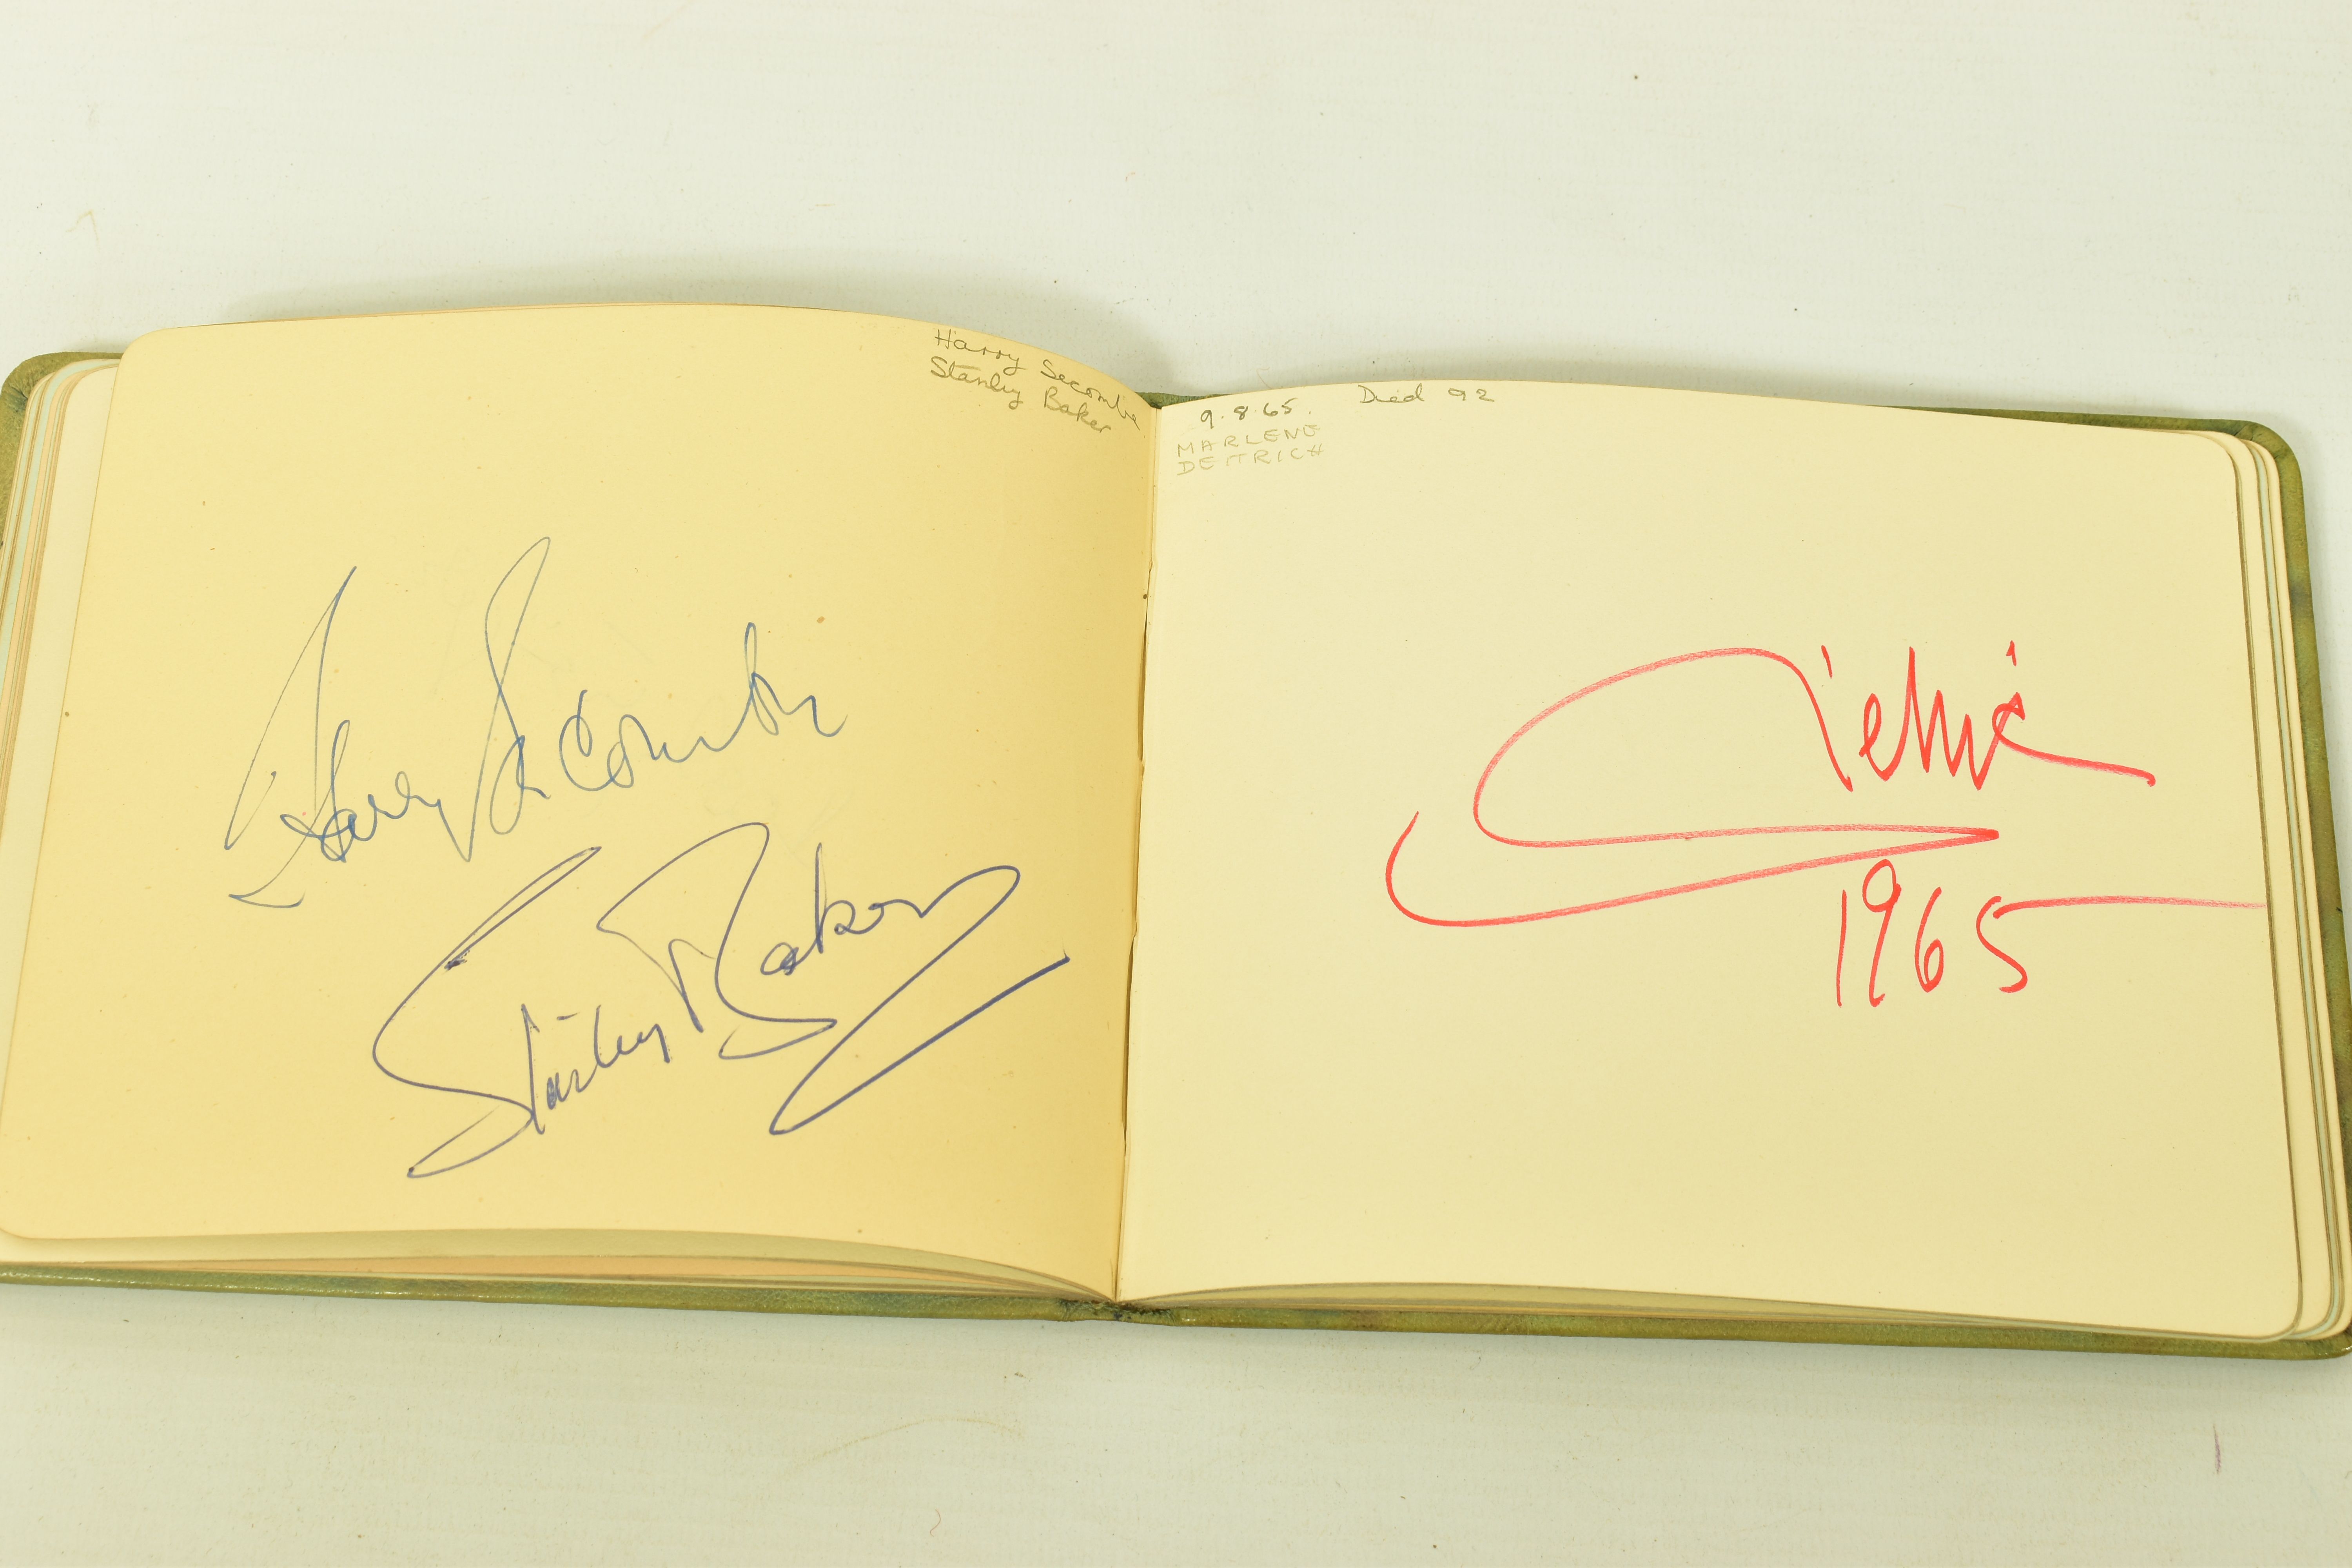 FILM & STAGE AUTOGRAPH ALBUM, a collection of signatures in an autograph album featuring some of the - Image 6 of 12